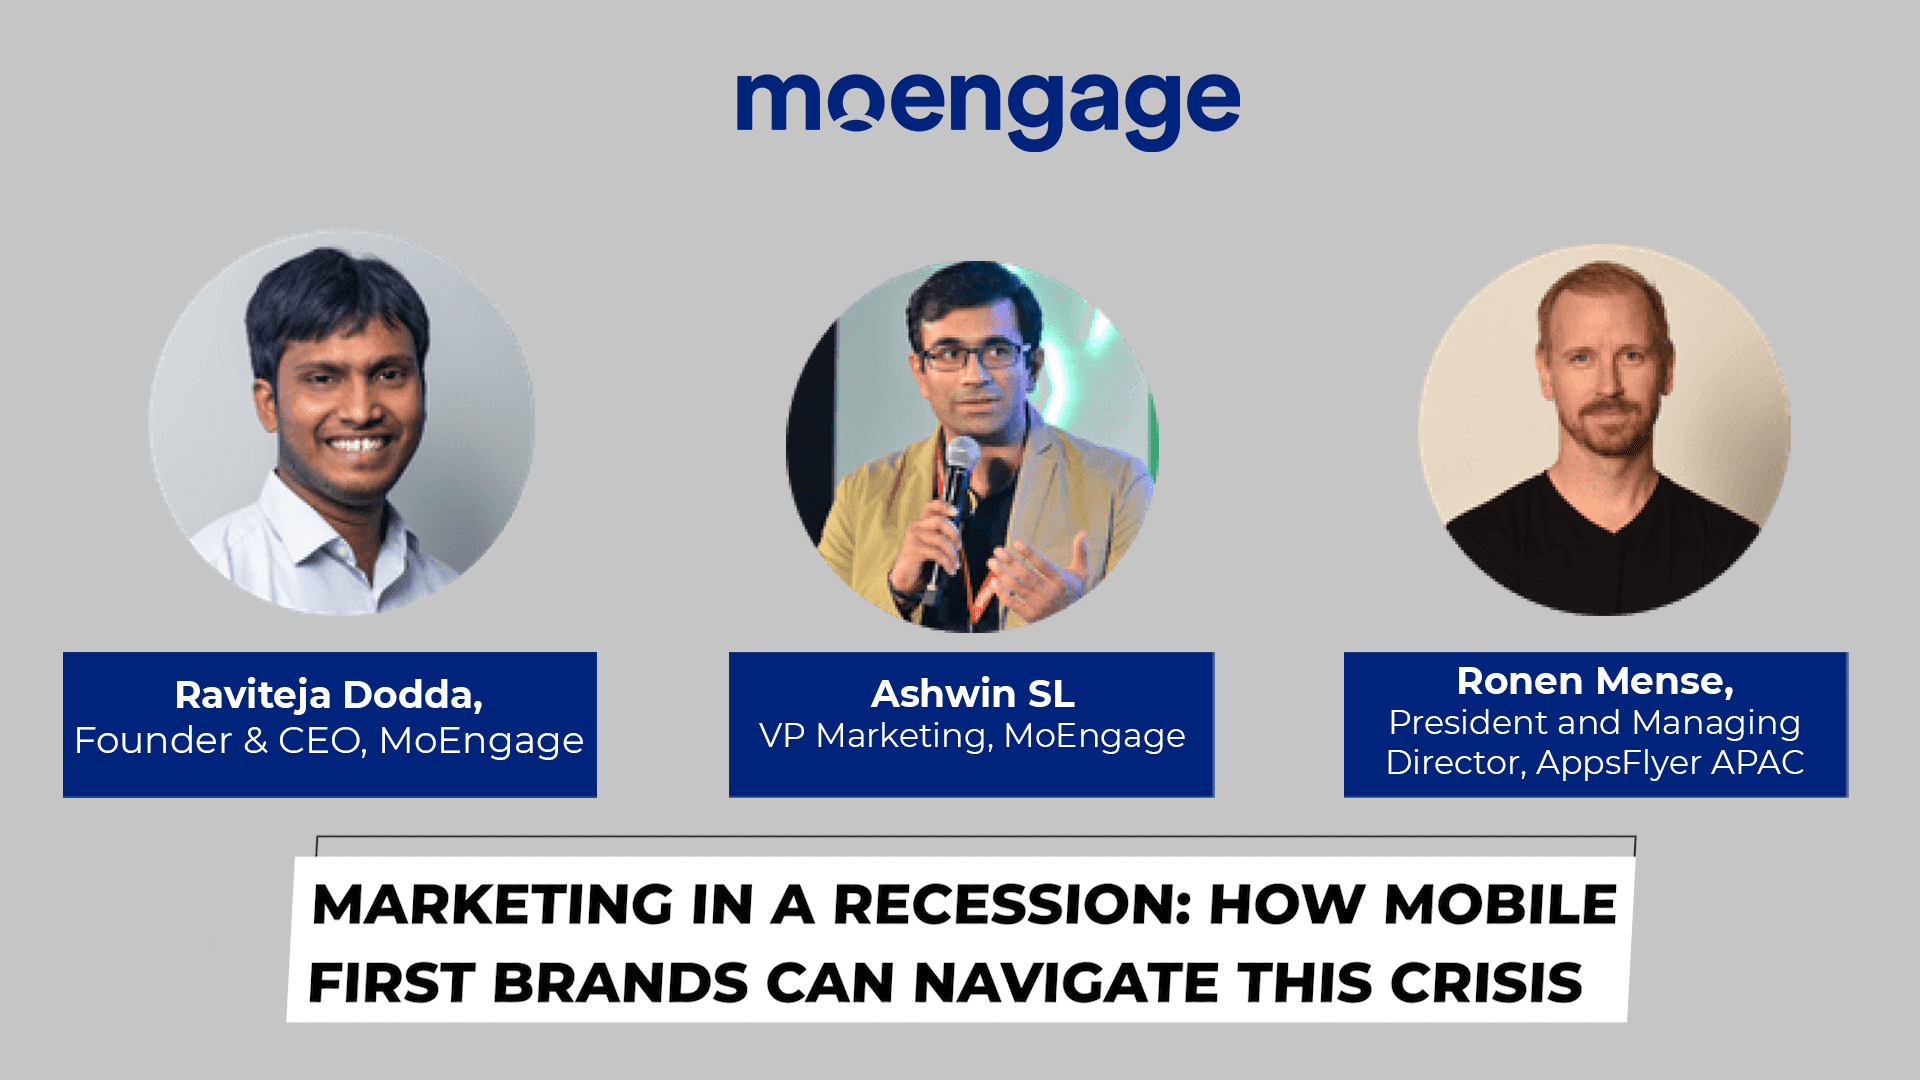 Panel discussion on marketing in a recession